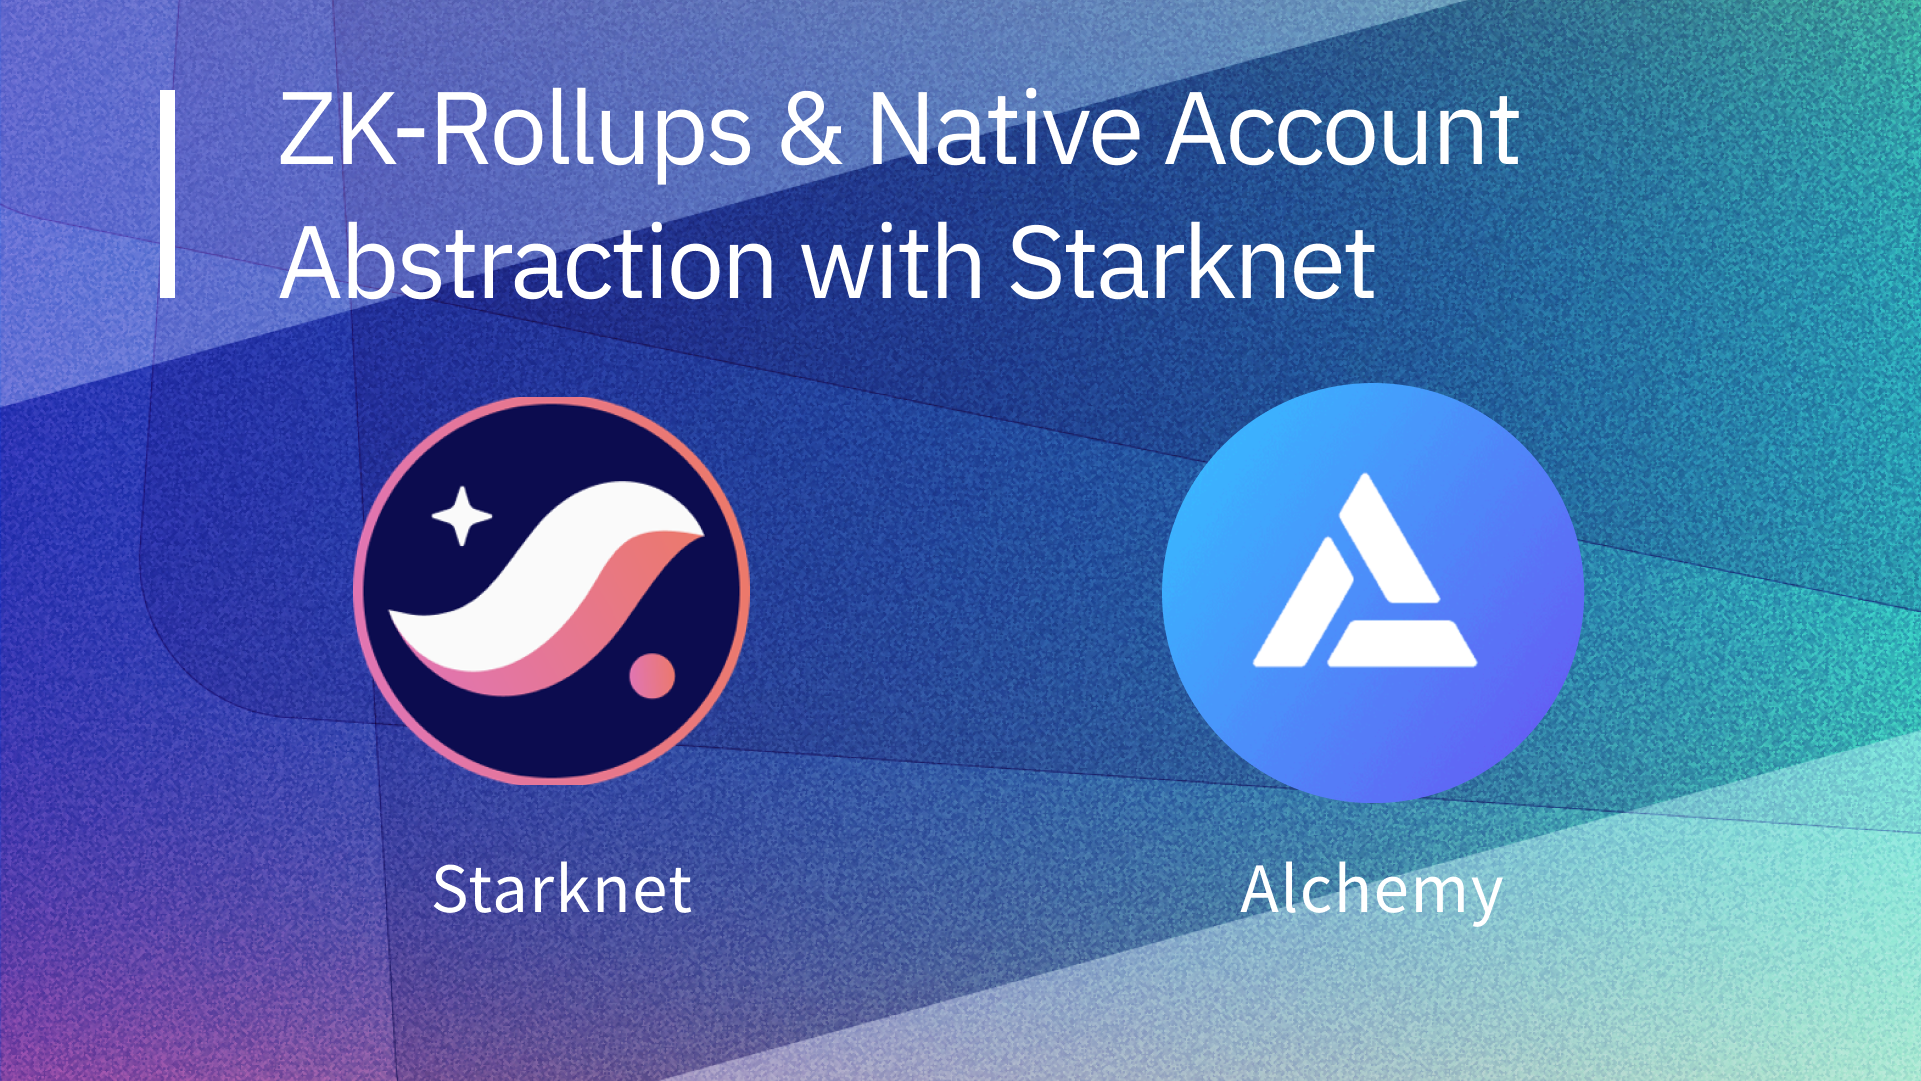 Twitter Space: ZK- Rollups & Native Account Abstraction with Alchemy